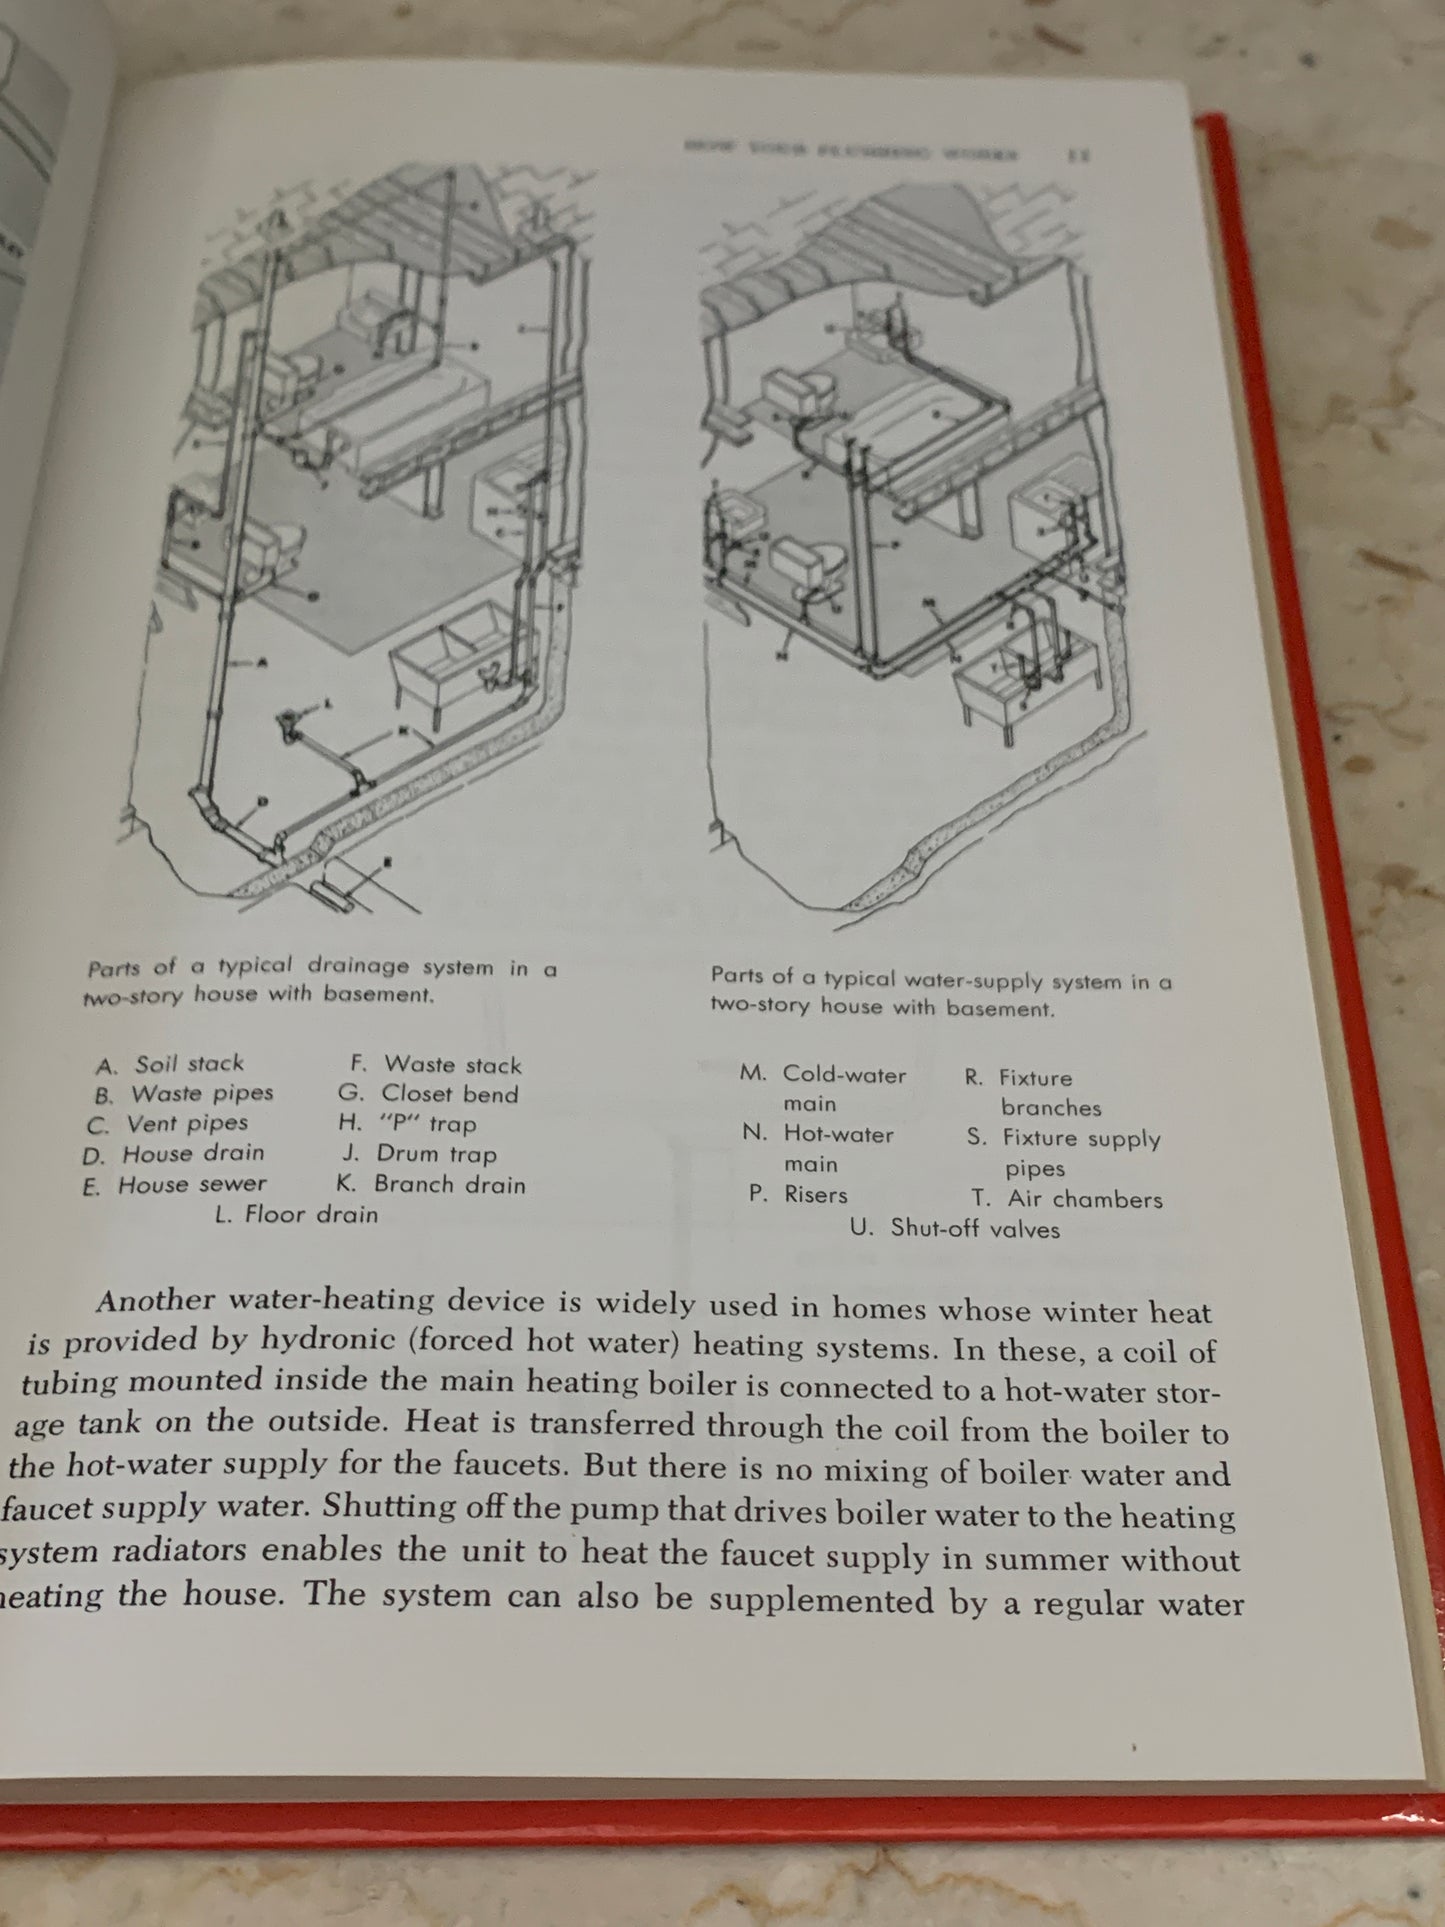 Plumbing, Heating, and Air Conditioning Vintage How to Book Home Improvement Book